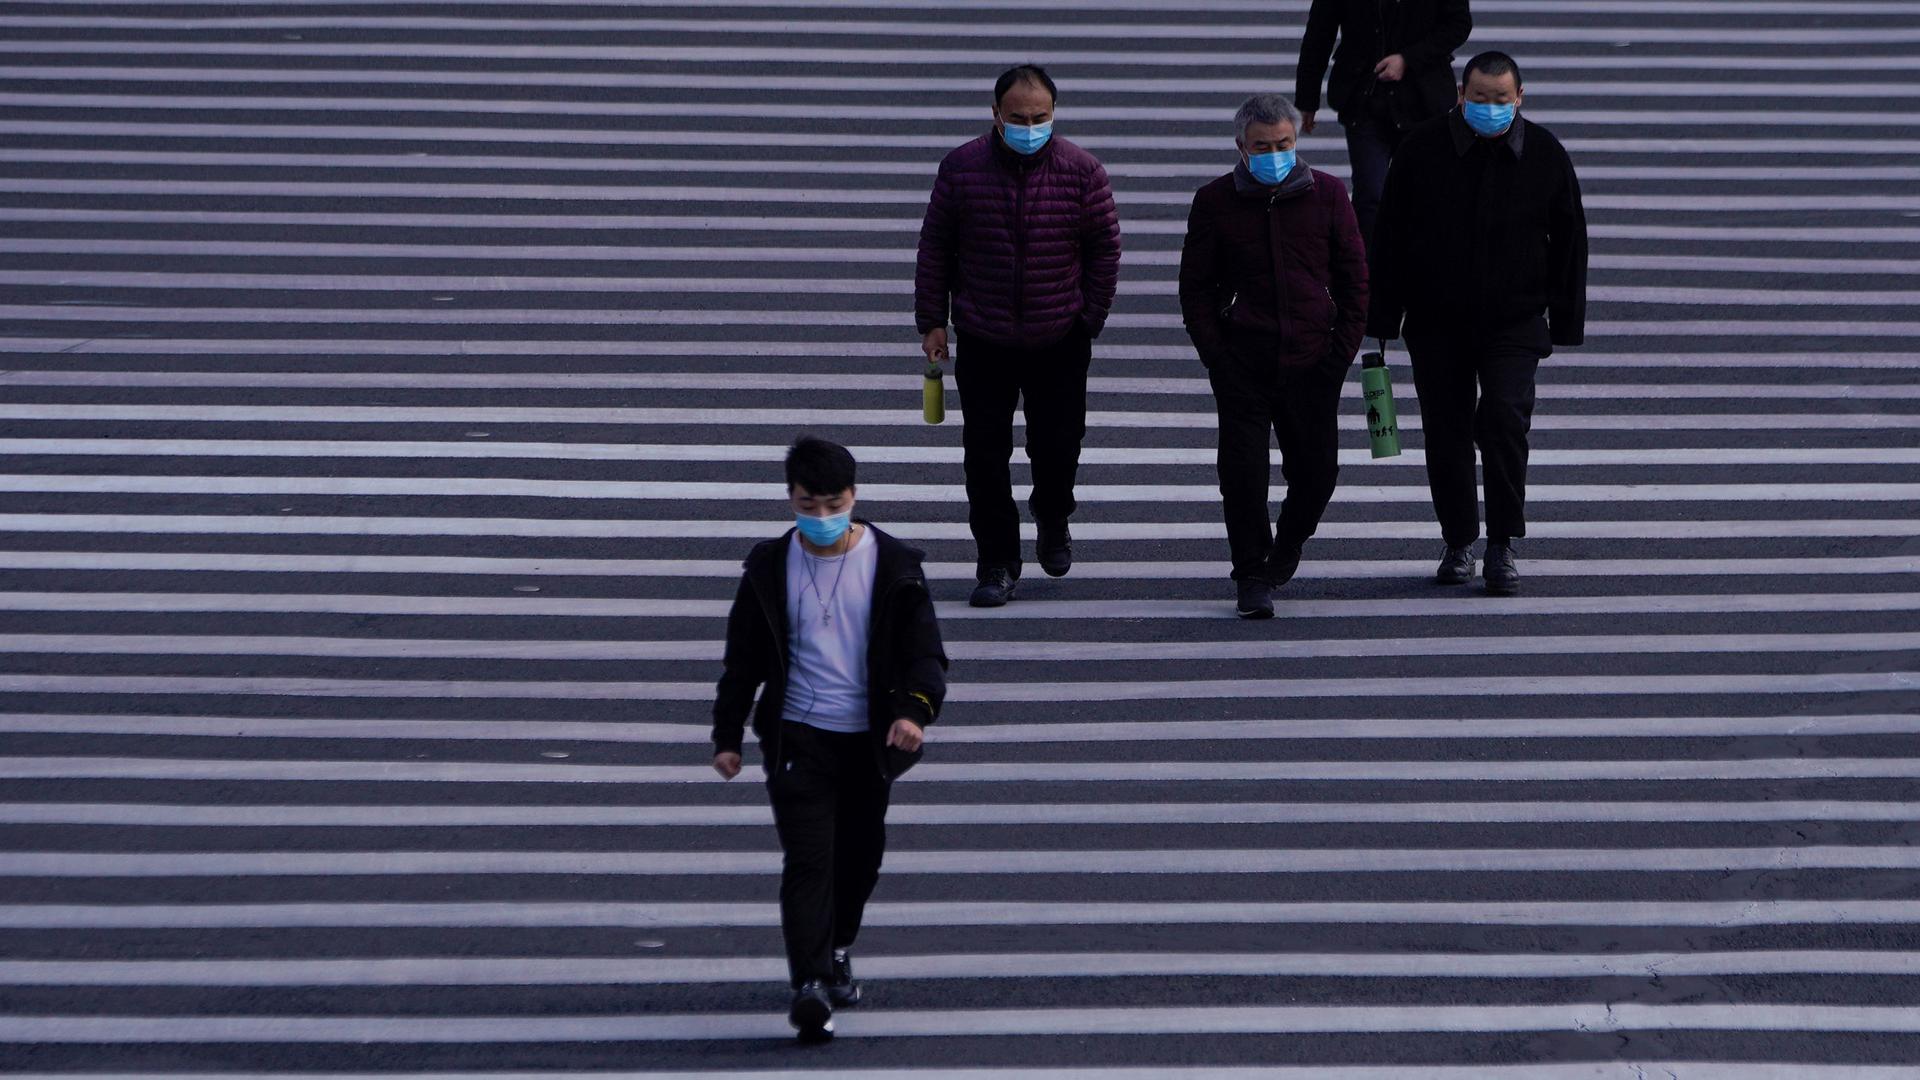 Several people are shown walking on a white-lined road and wearing face masks.